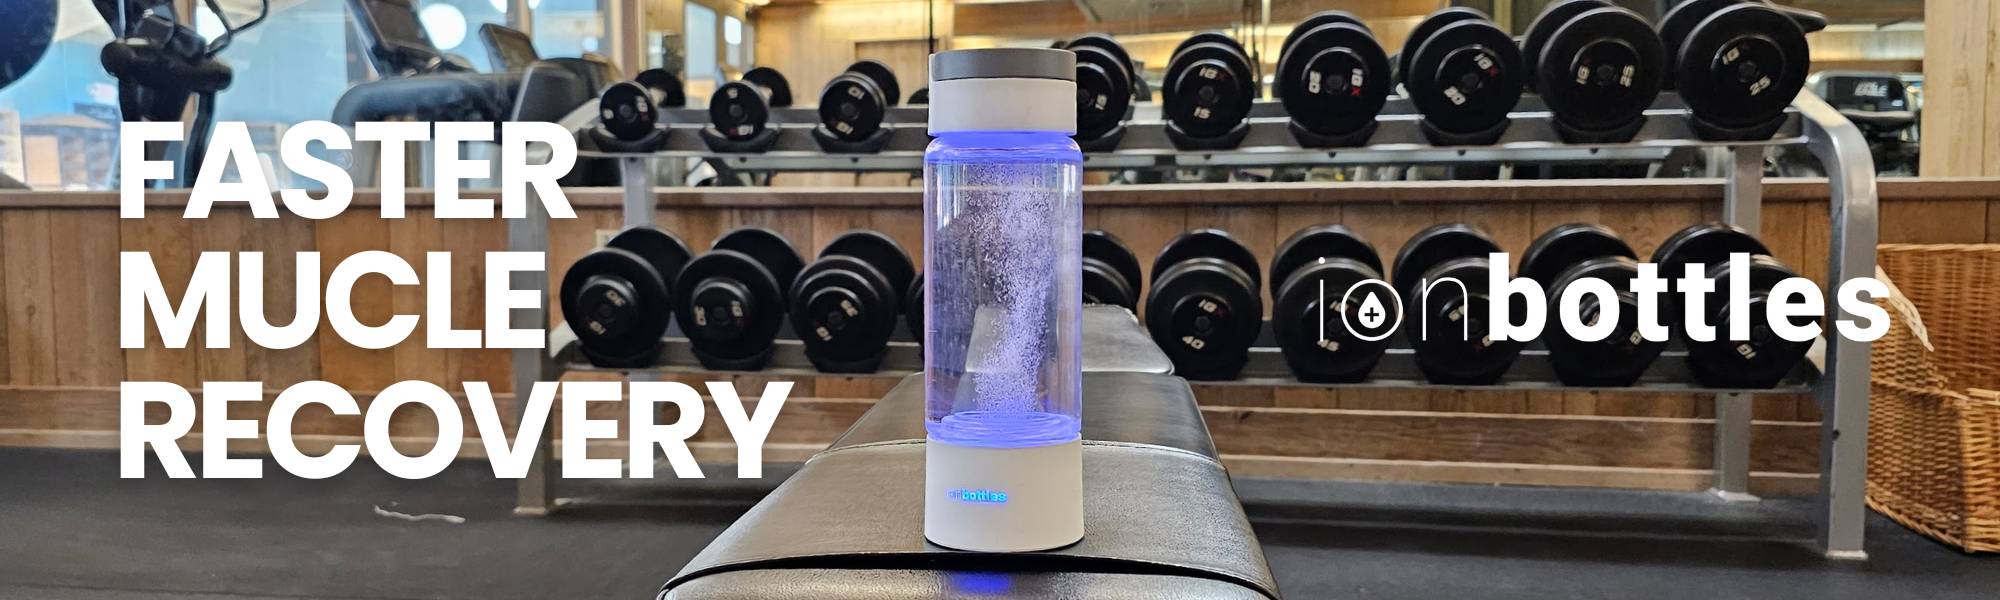 Faster Muscle Recovery With IonBottles Hydrogen Water